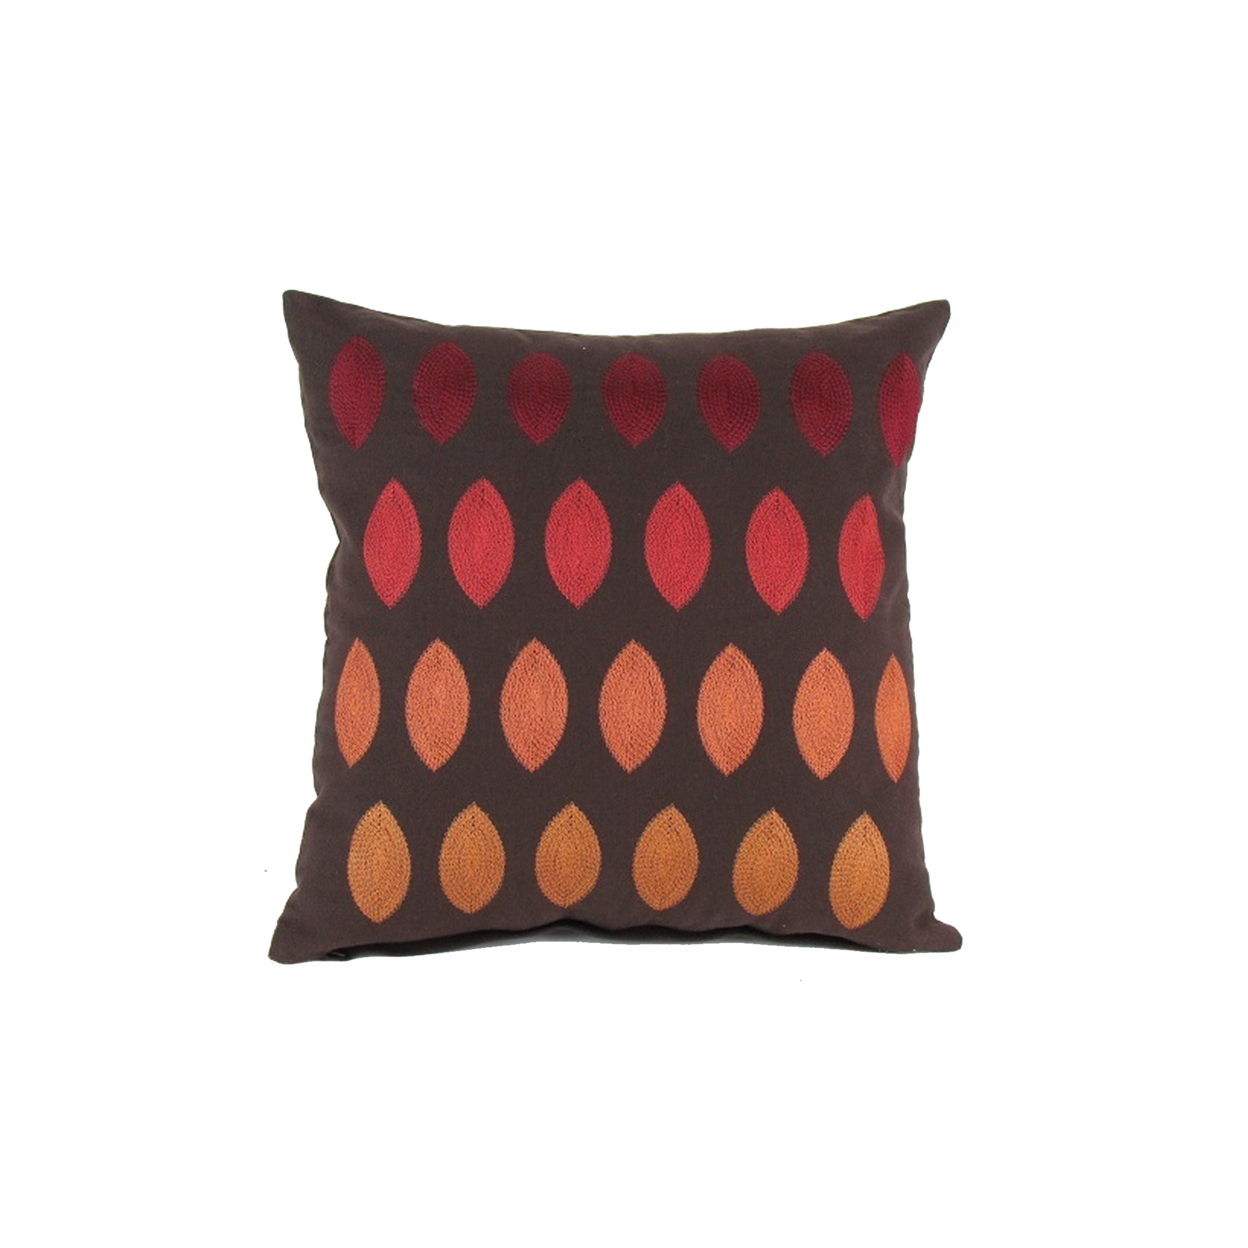 Fabric Accent Pillow With Embroidery, Brown And Red- Saltoro Sherpi